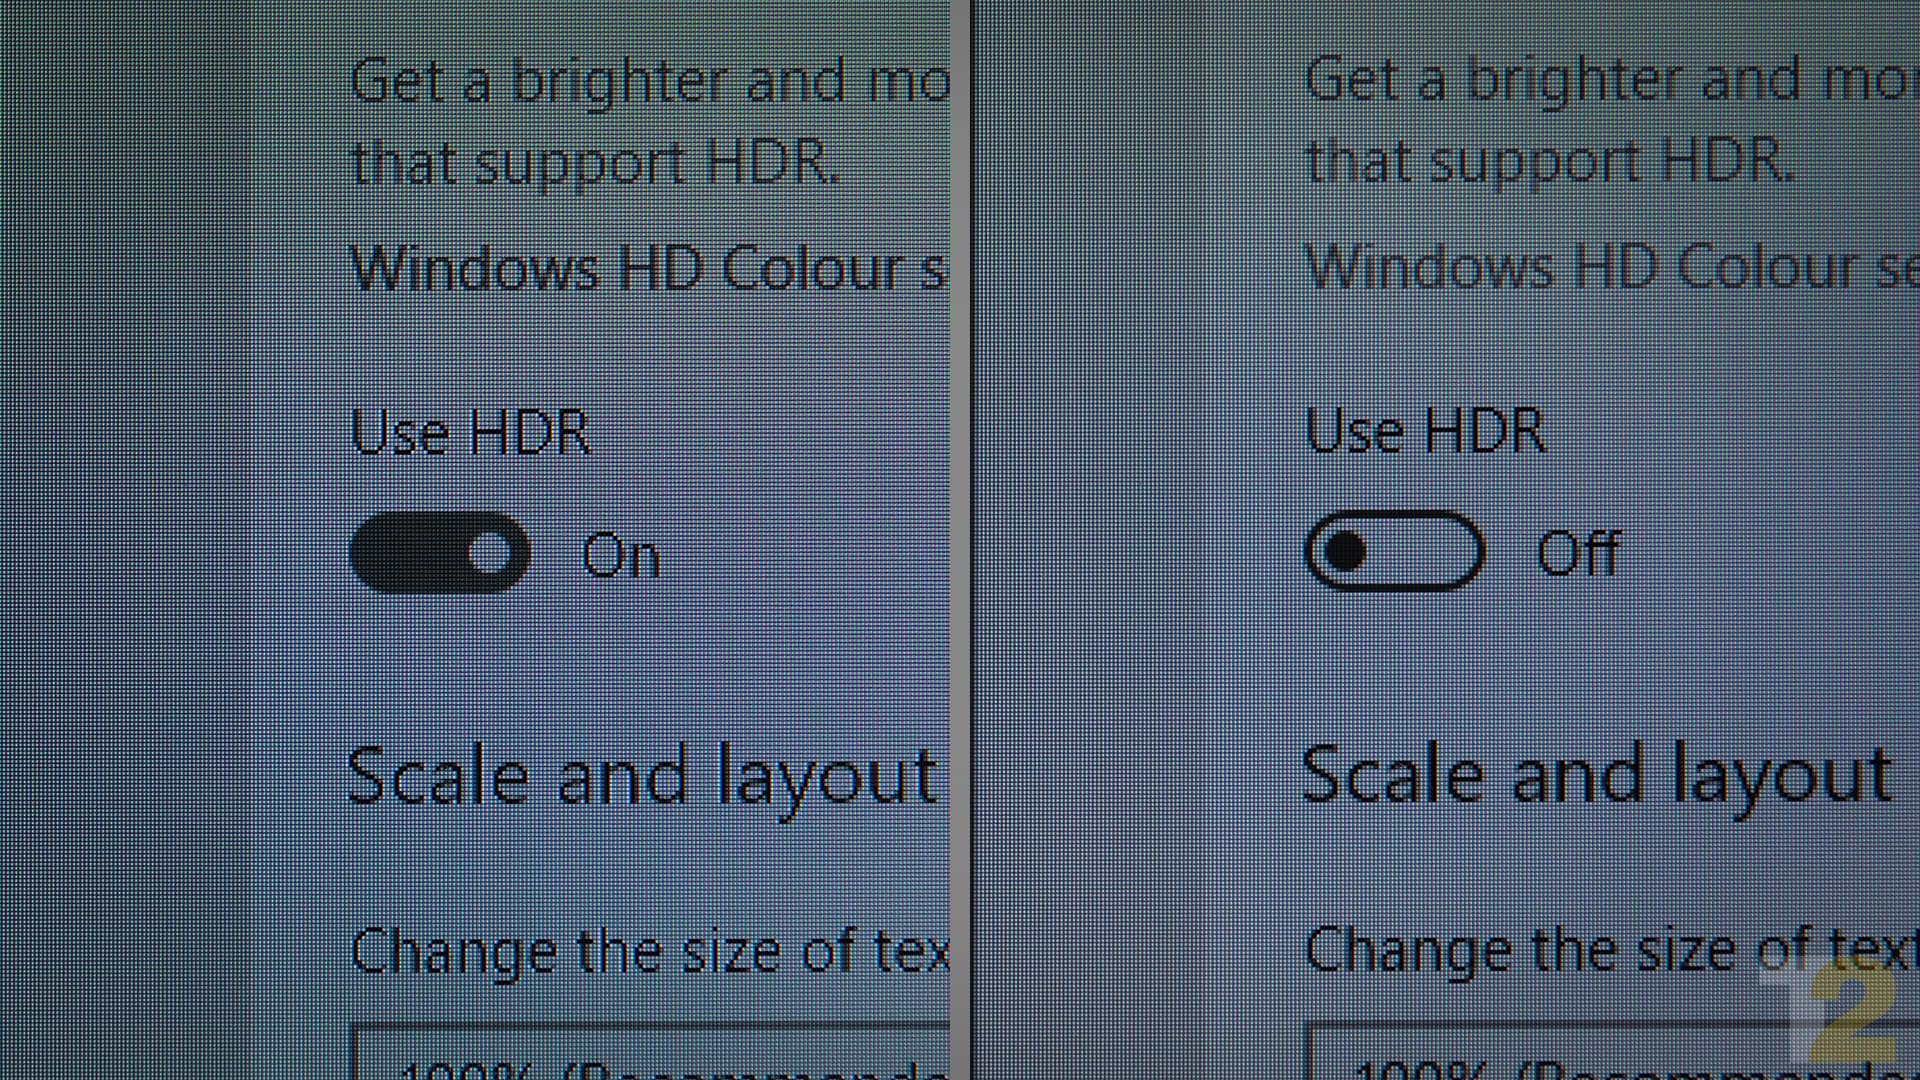 HDR looks great for content, but is painful to use in Windows 10. Here you can see the detrimental effects that enabling HDR has on text rendering in Windows 10. The issue is not as noticeable on macOS. Image: Anirudh Regidi